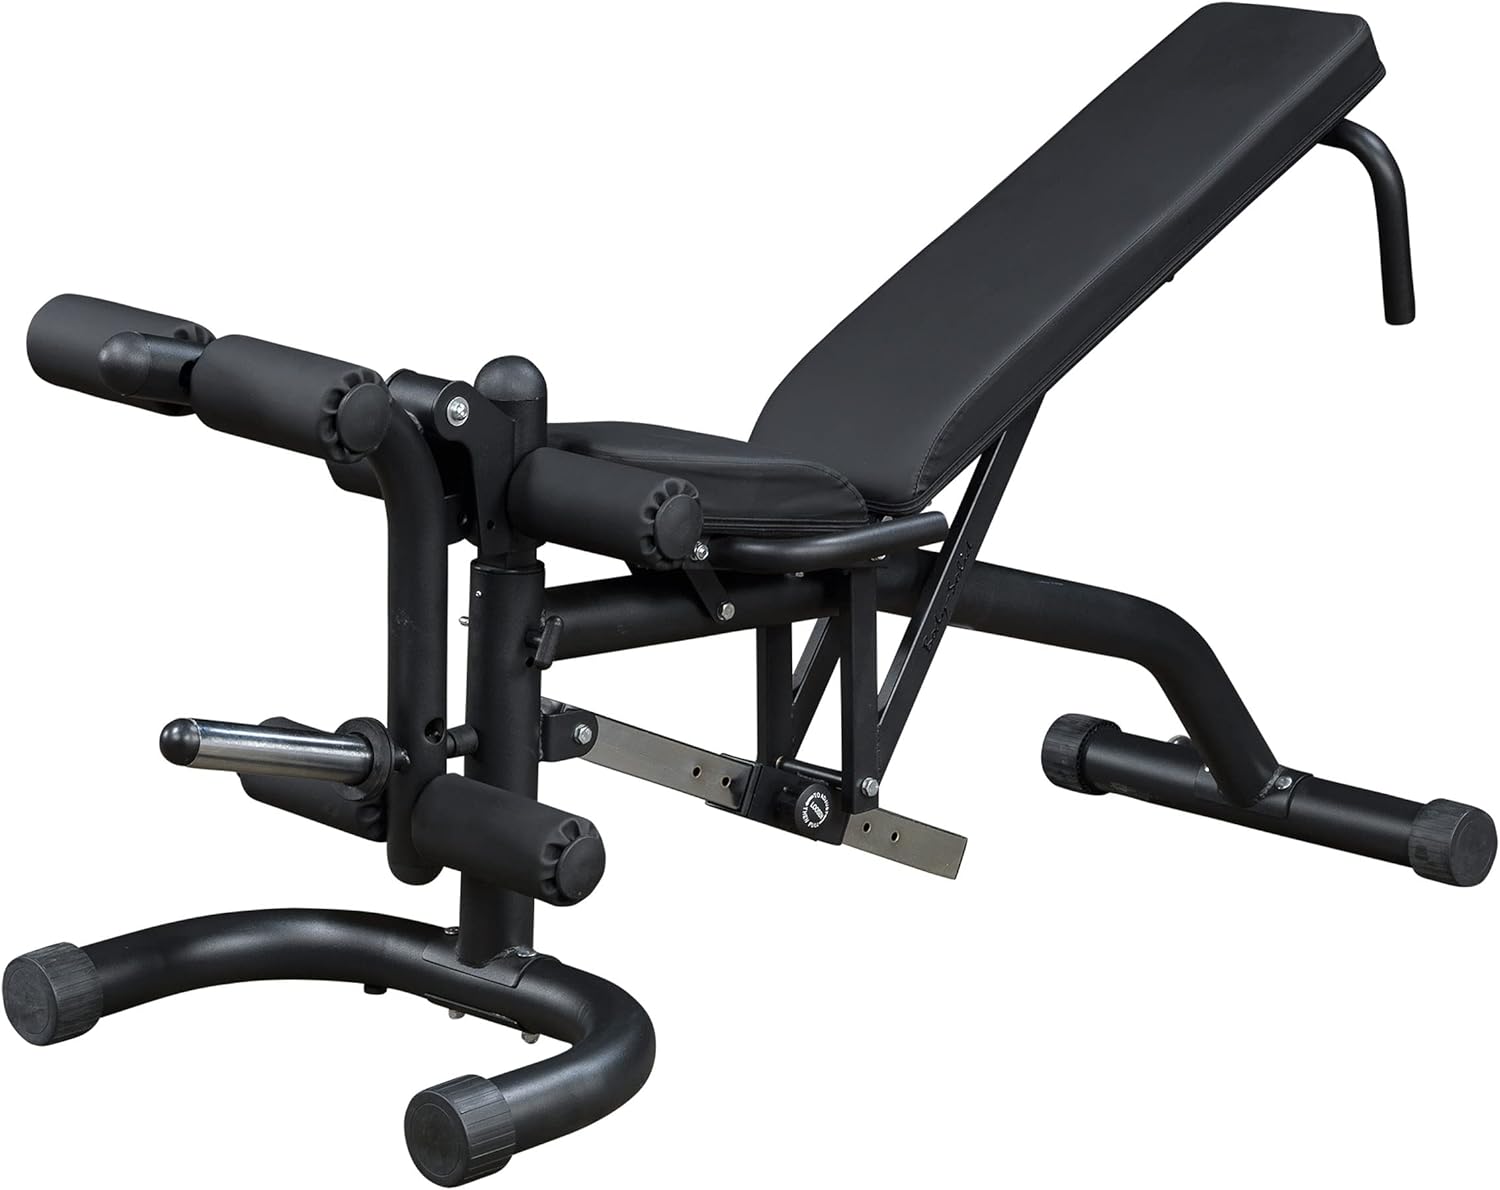 The Body Solid FID Adjustable Weight Bench